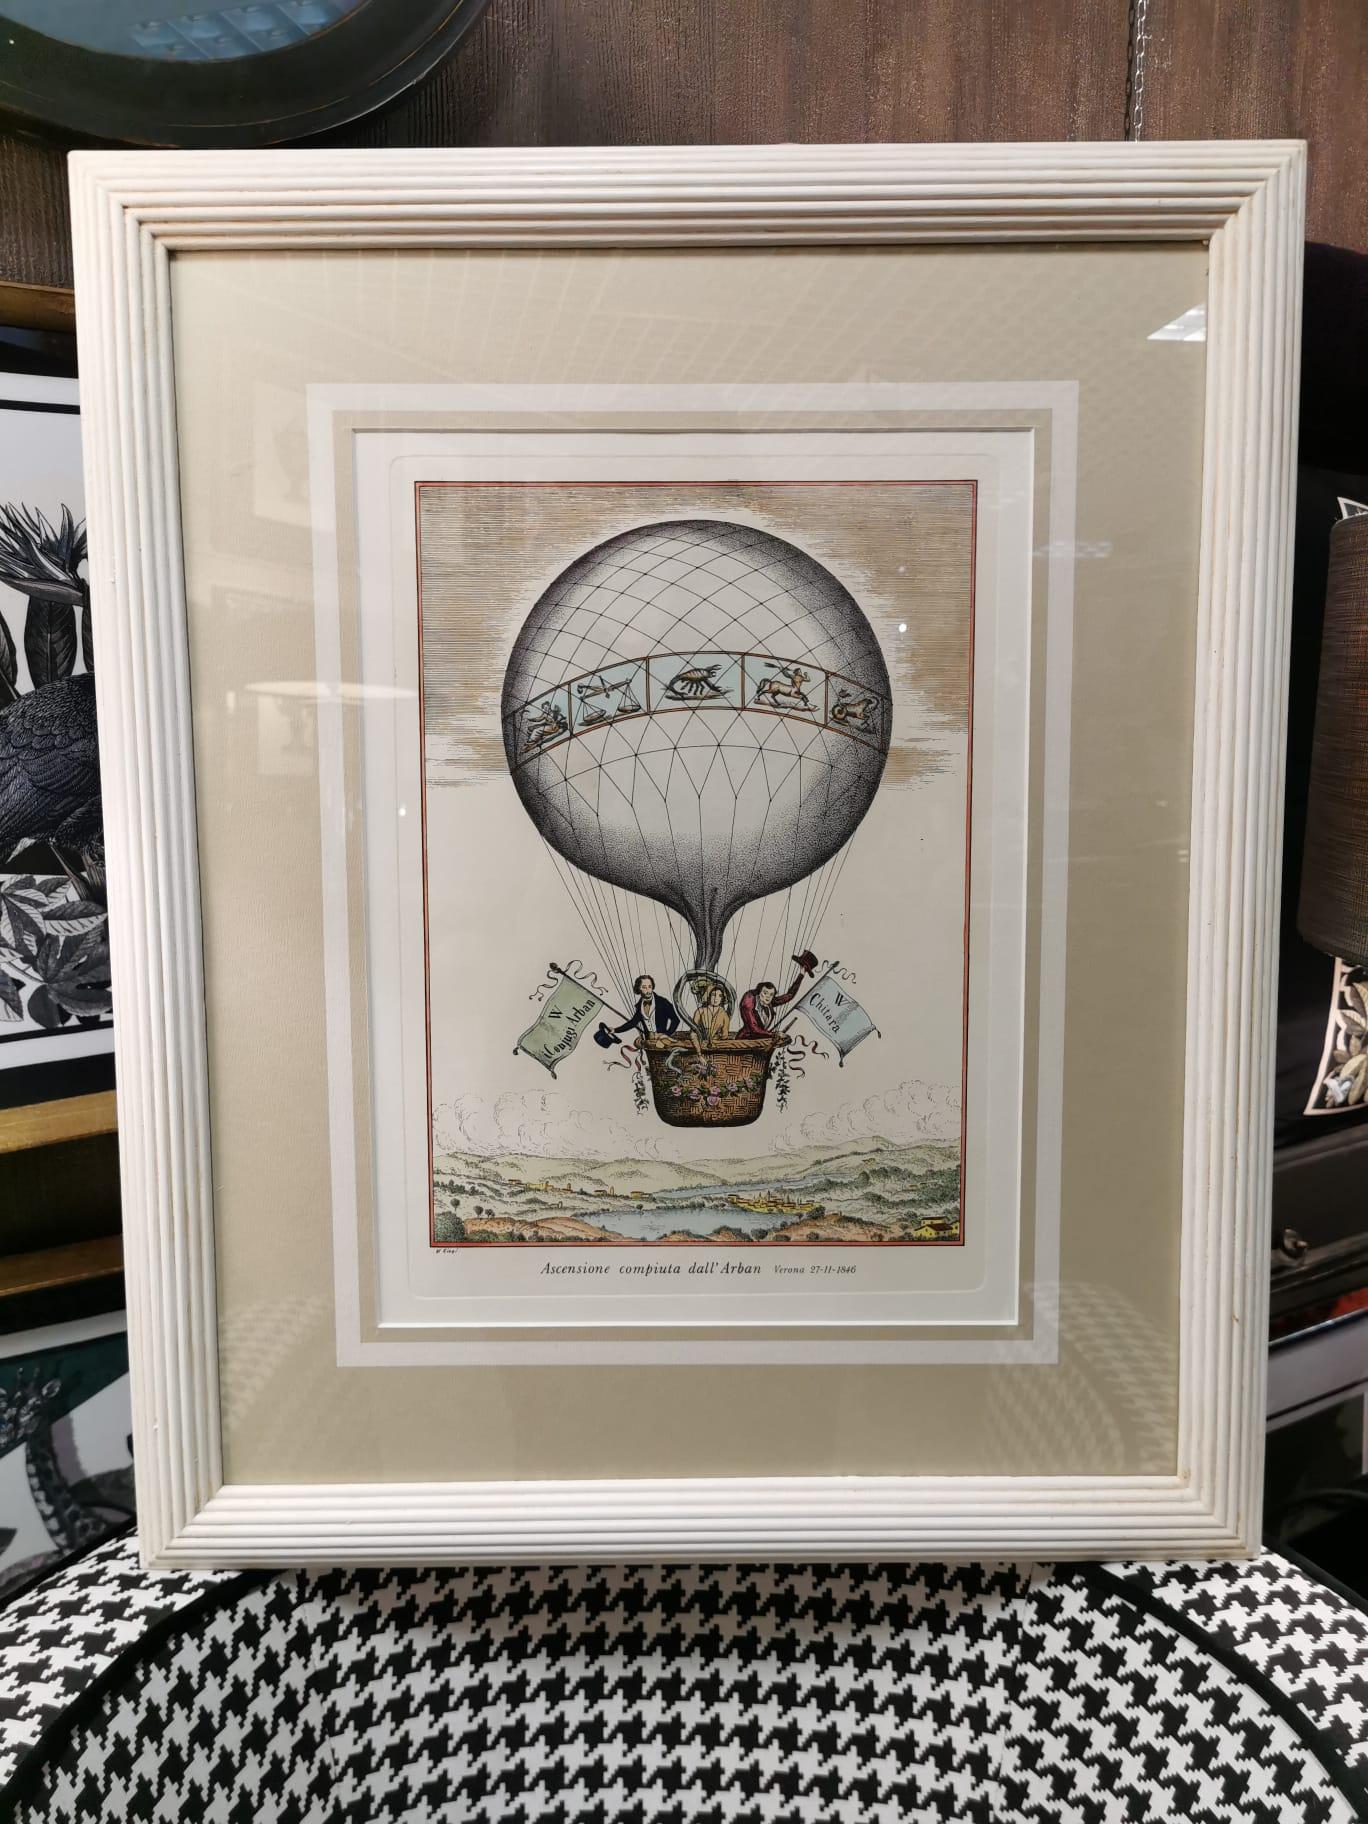 Italian Contemporary Handmade Hot-Air Balloon Colored Print with Frame 1 of 3 For Sale 2